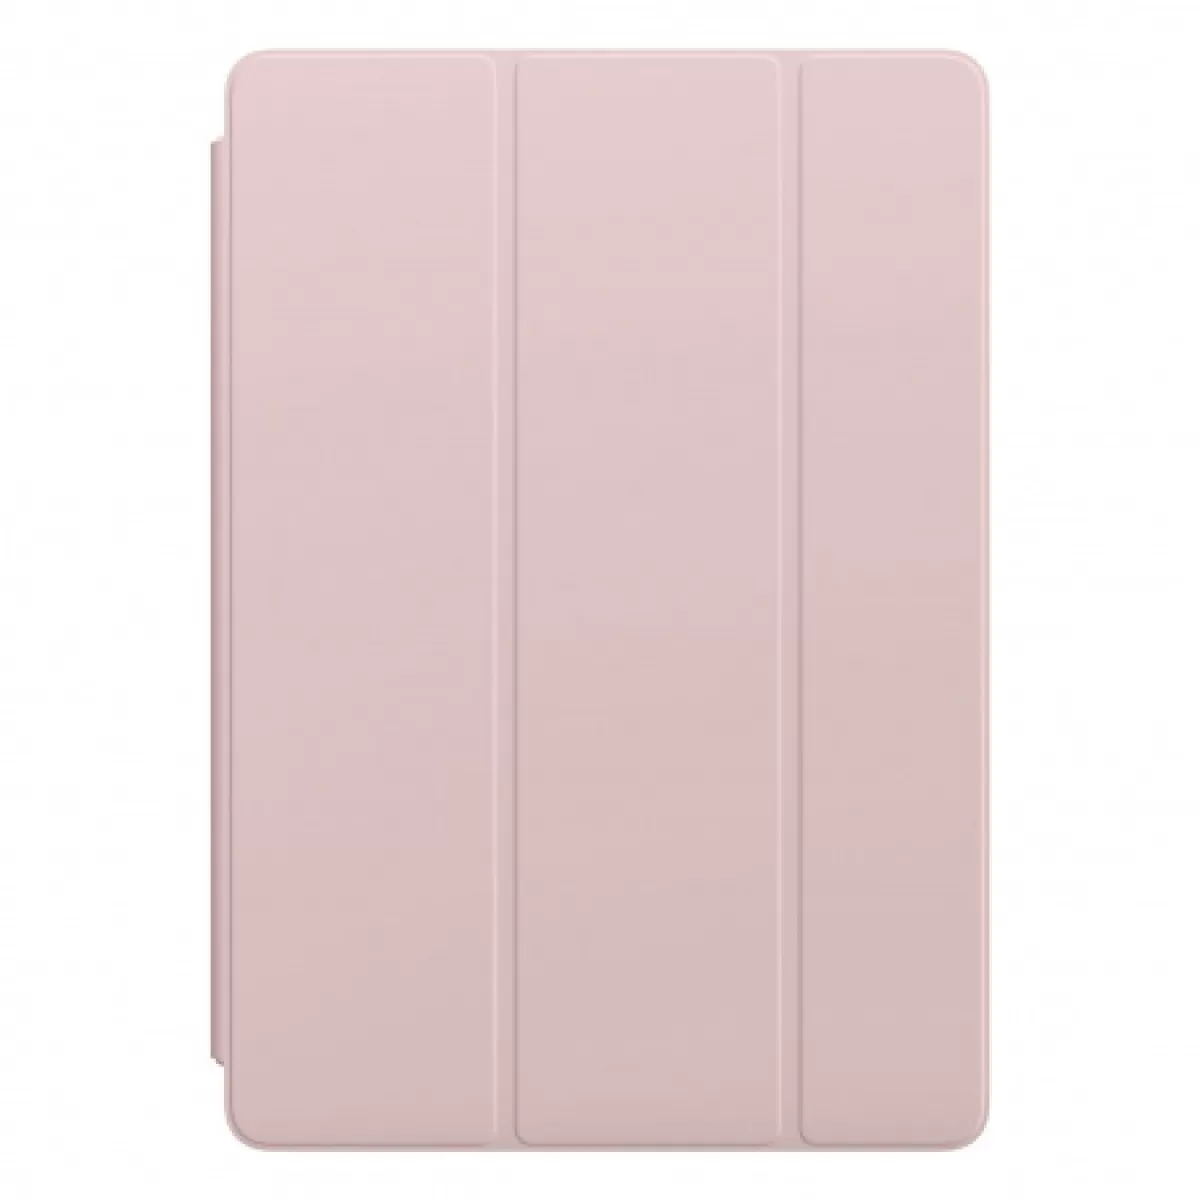 Apple Smart Cover for 10.5inch iPad Pro Pink Sand